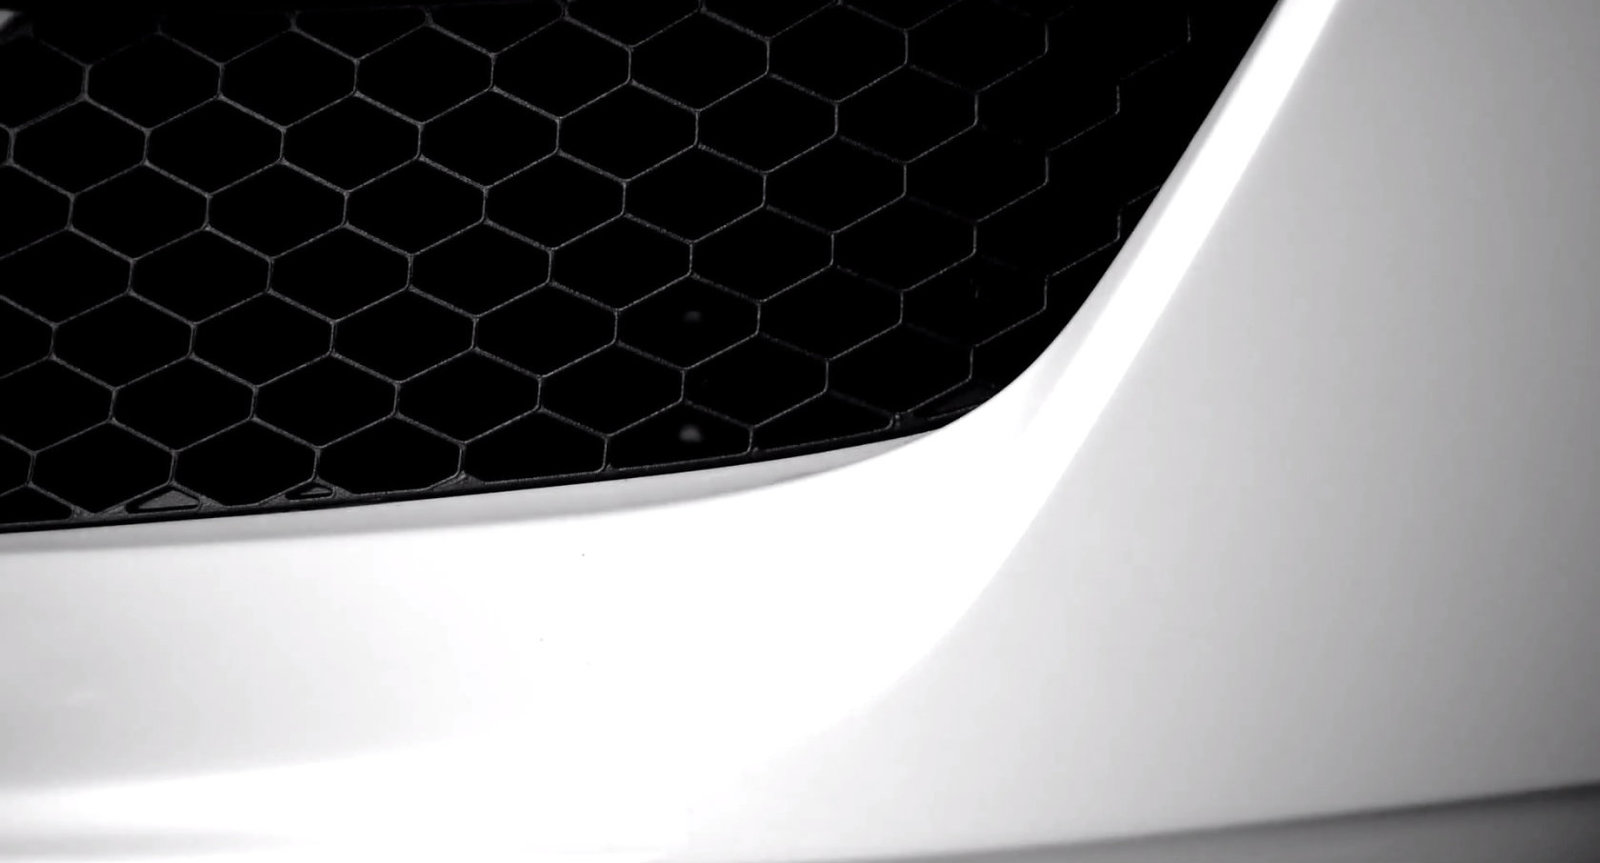 teaser-confirms-2016-shelby-mustang-gt350-new-details-emerge-video-photo-gallery_5.jpg